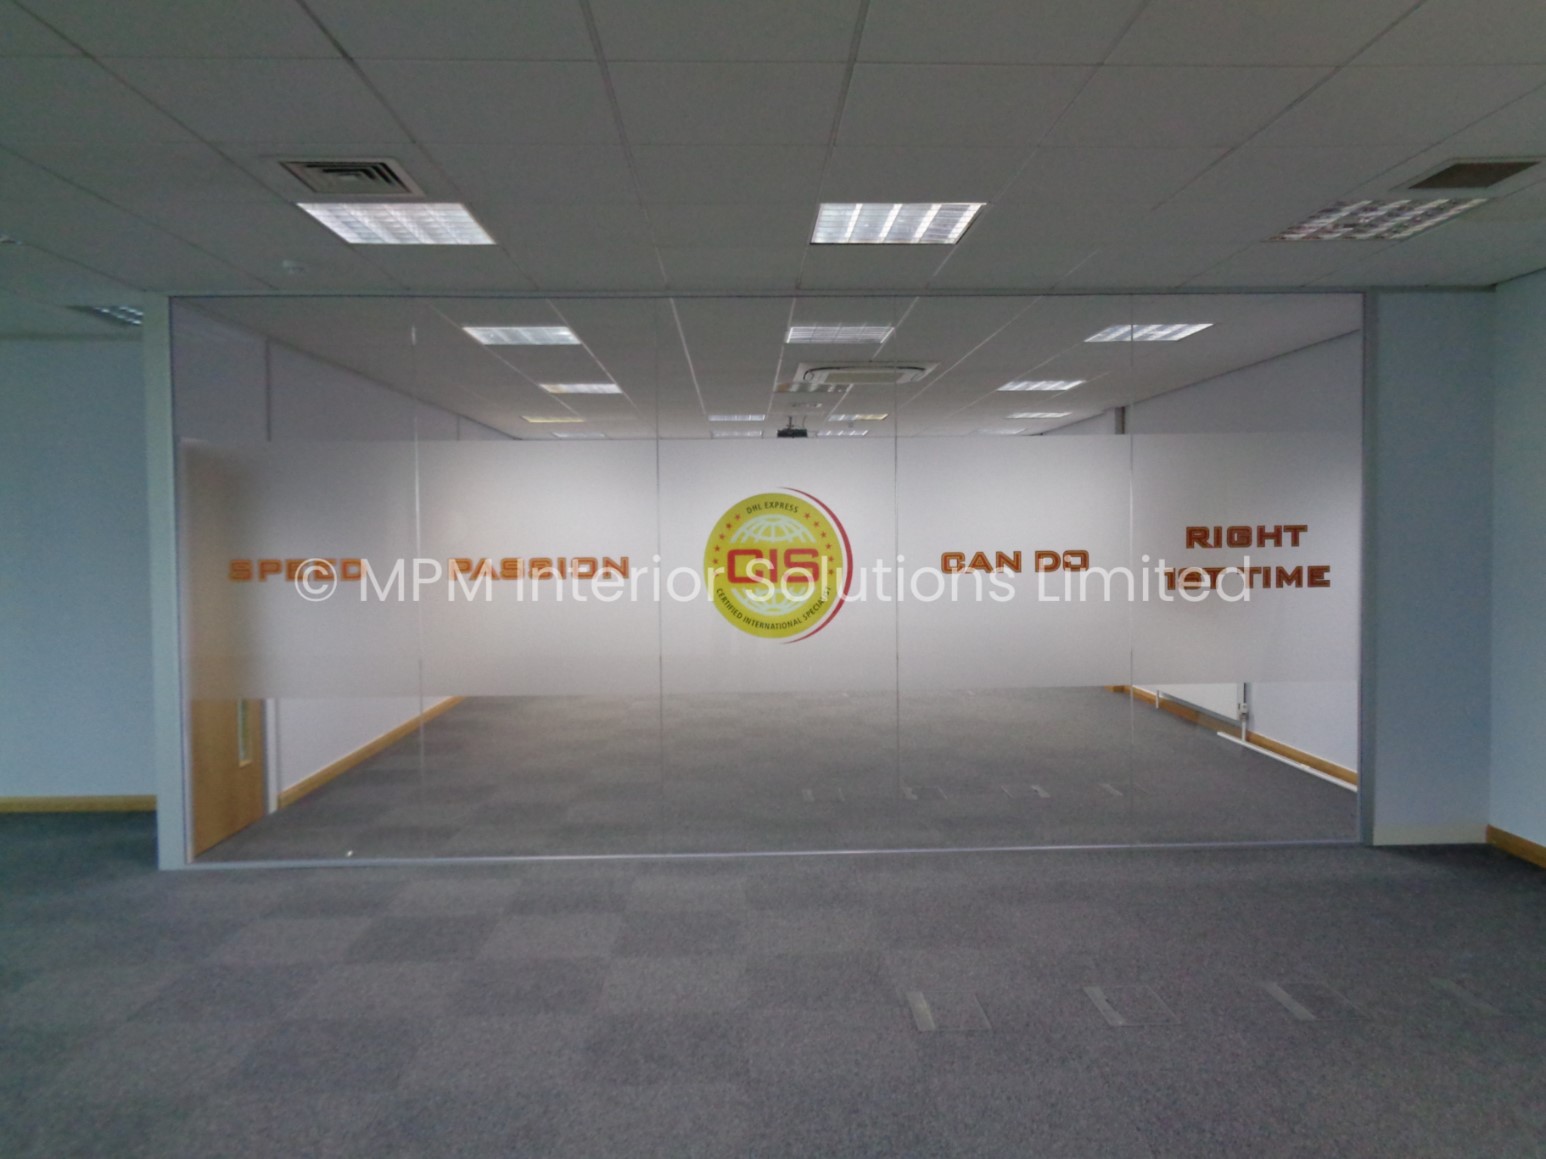 Frameless Glass Office Partitioning, 75mm > 100mm Demountable Office Partitioning, DHL International (UK) Ltd (Park Royal, London), MPM Interior Solutions Limited